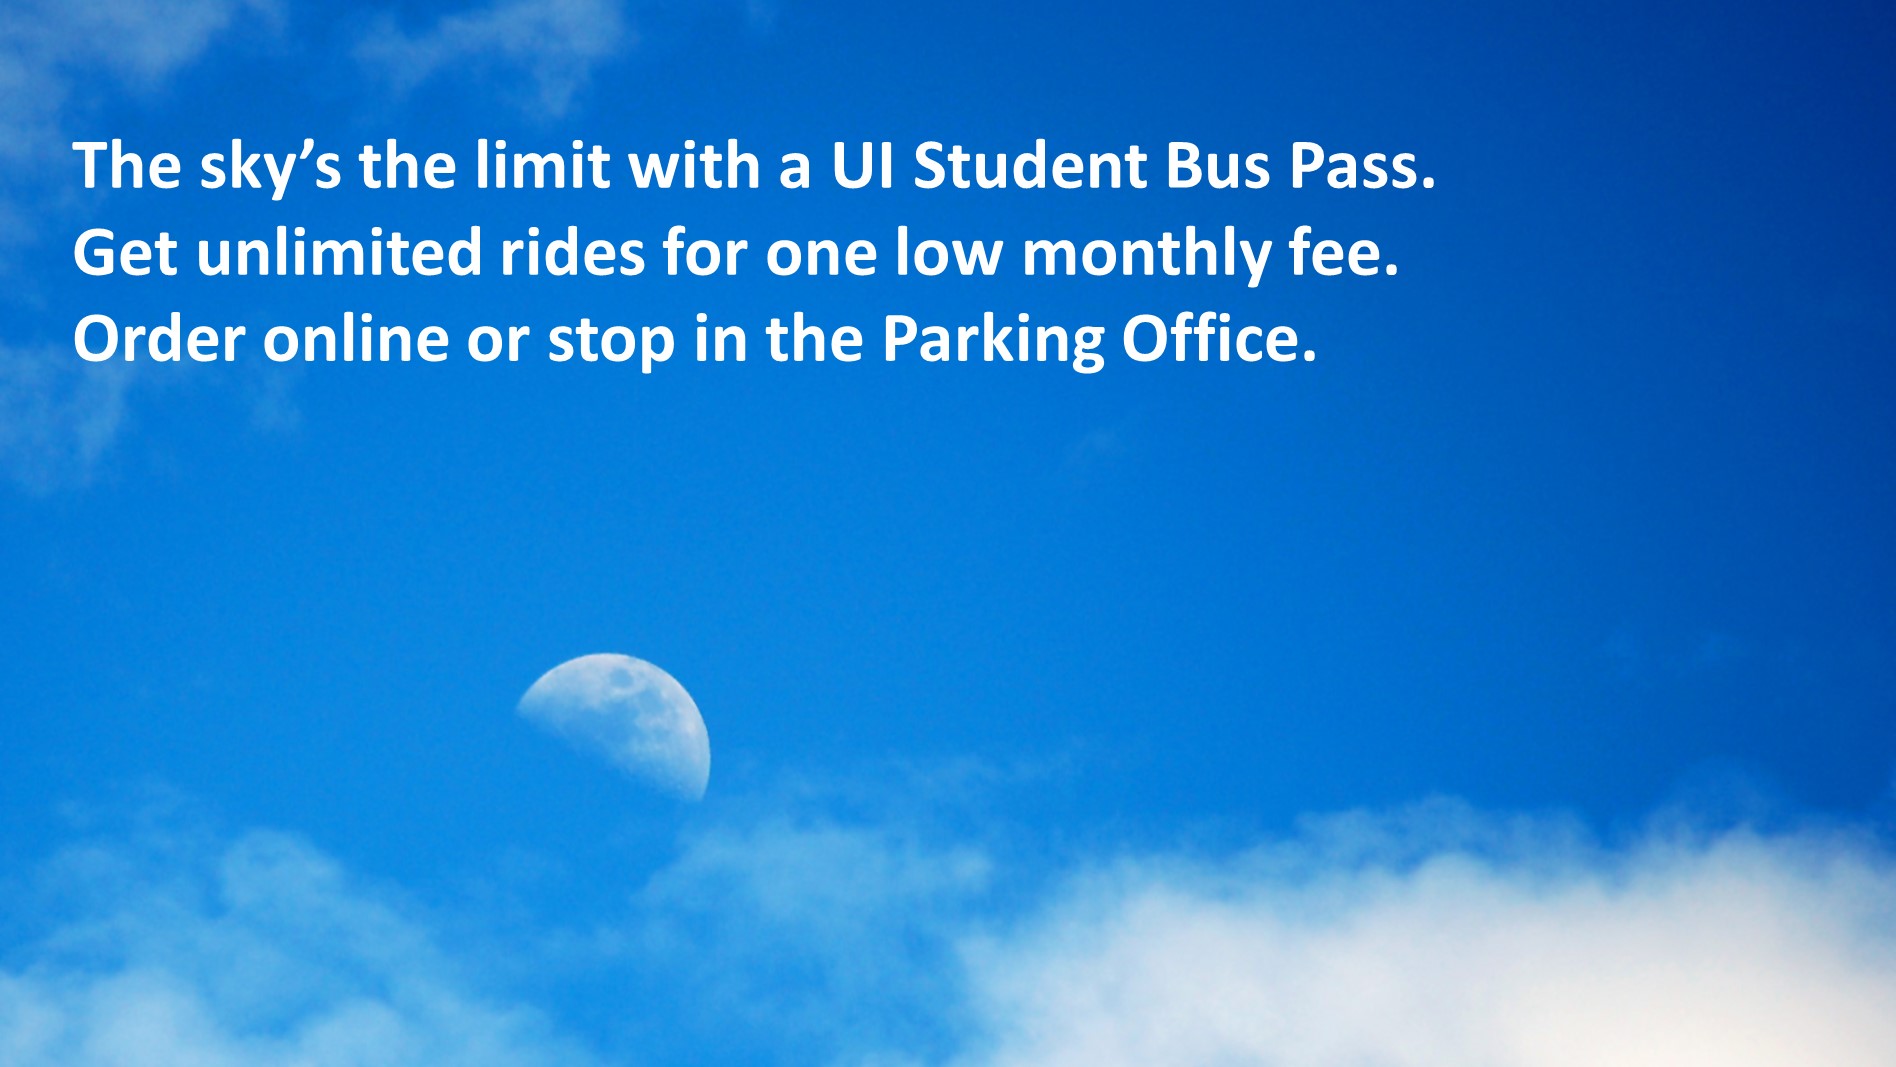 Student bus pass gives unlimited rides for one low monthly fee.